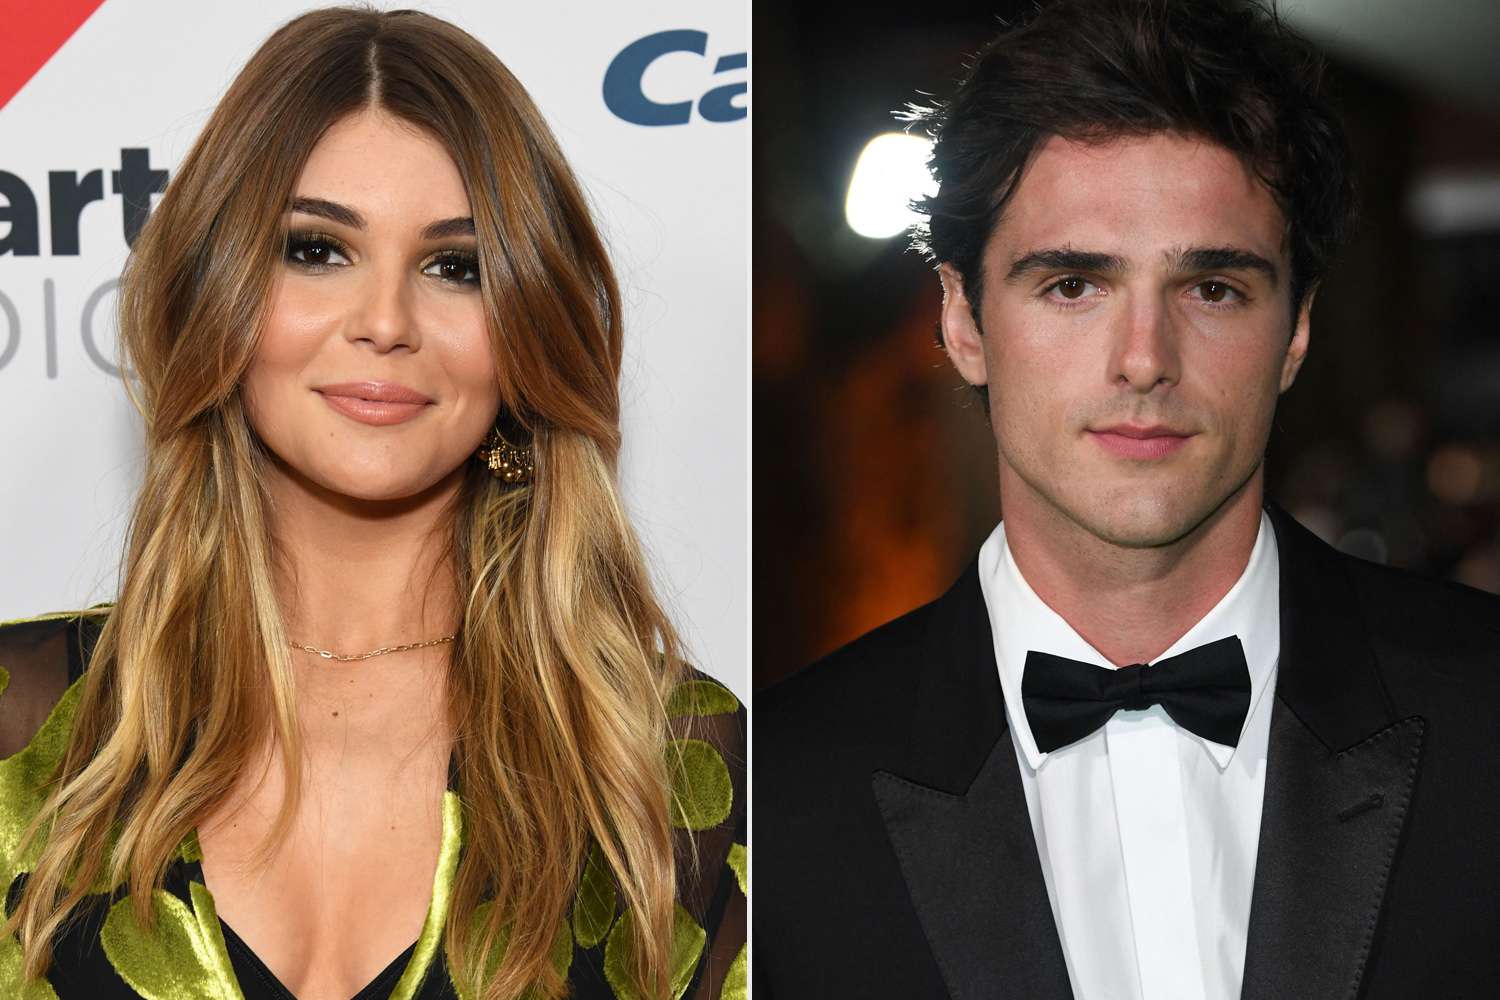 Jacob Elordi And Olivia Jade: Still Going Strong During ‘SNL’ Rehearsals